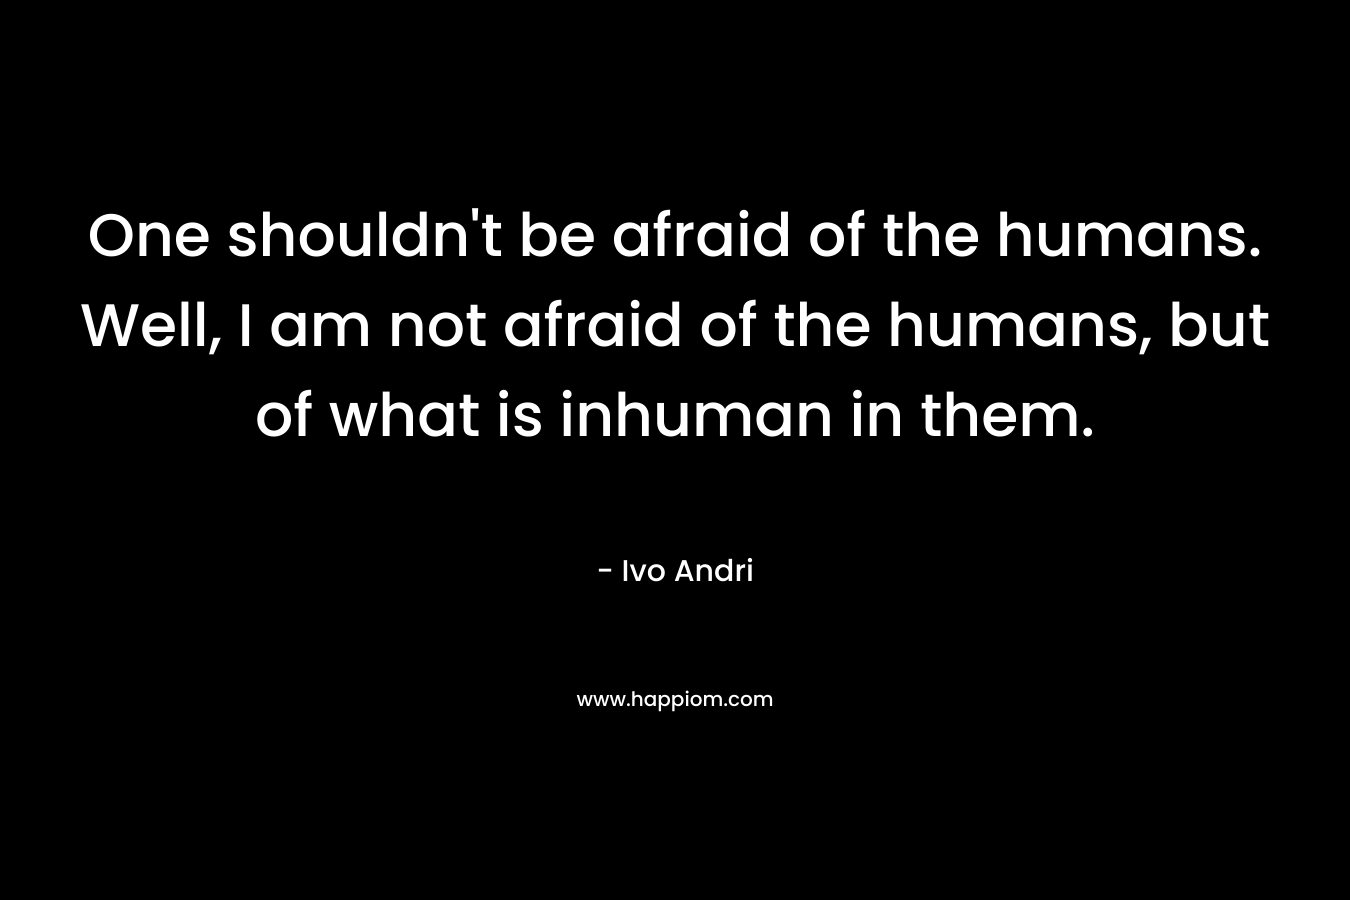 One shouldn’t be afraid of the humans. Well, I am not afraid of the humans, but of what is inhuman in them. – Ivo Andri